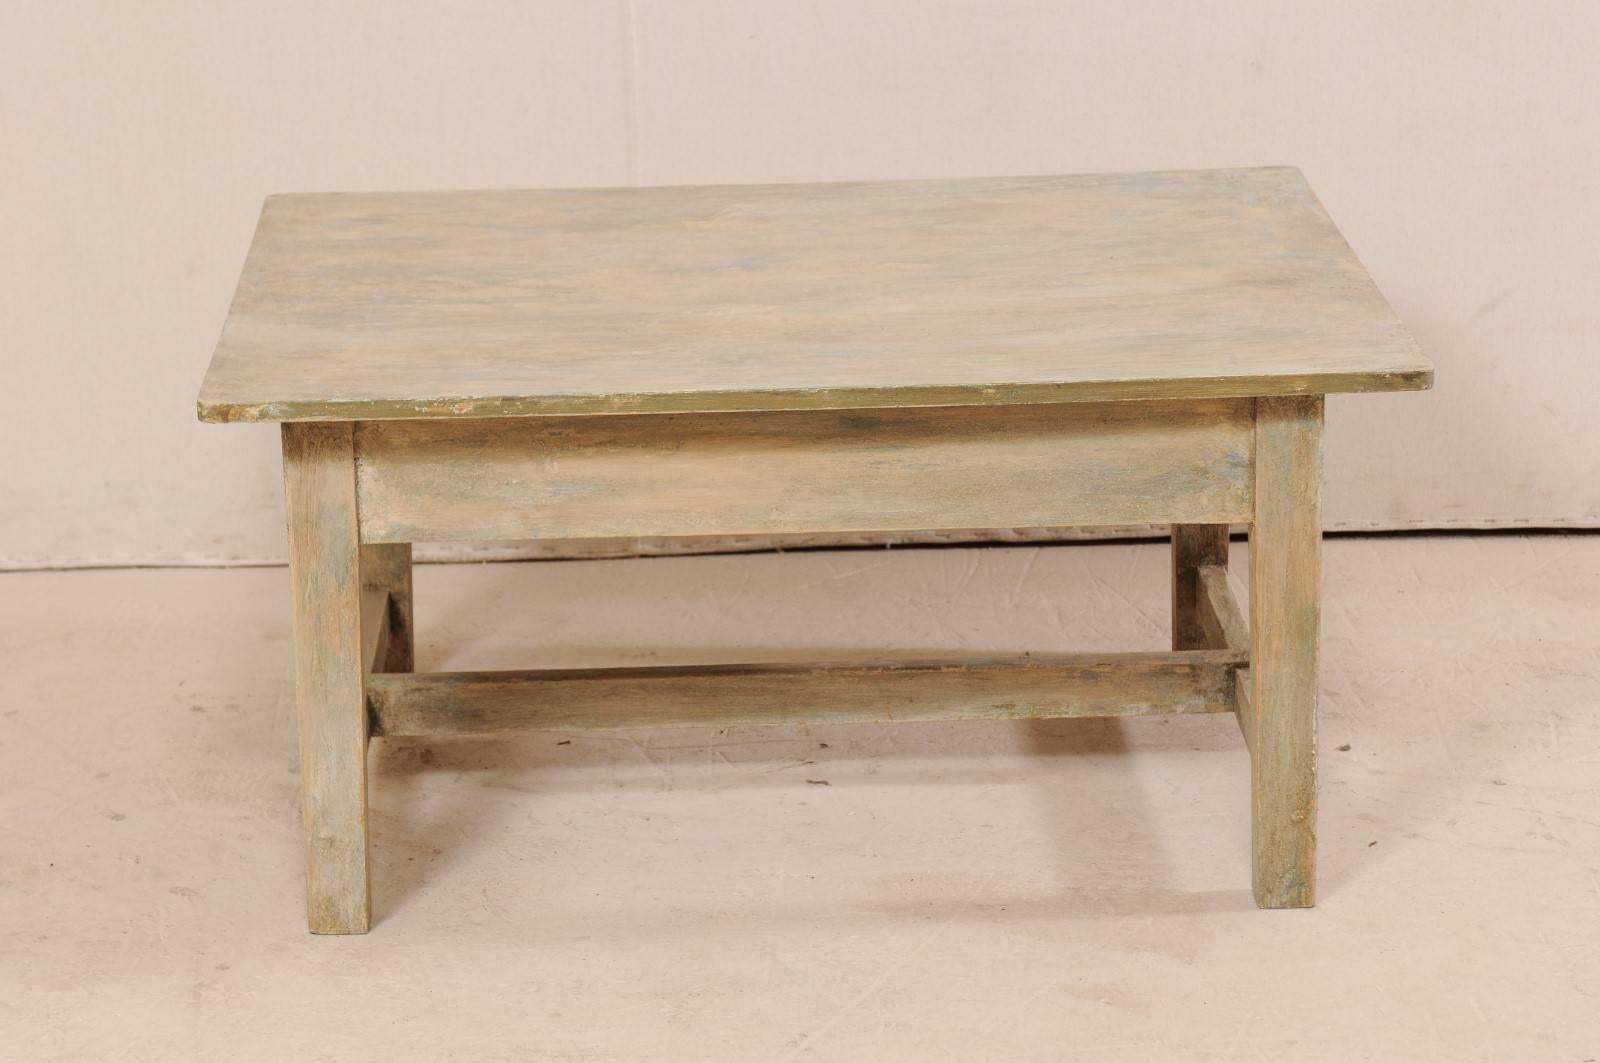 Swedish Mid-20th Century Painted Wood Coffee Table in Neutral Beige Tones 6